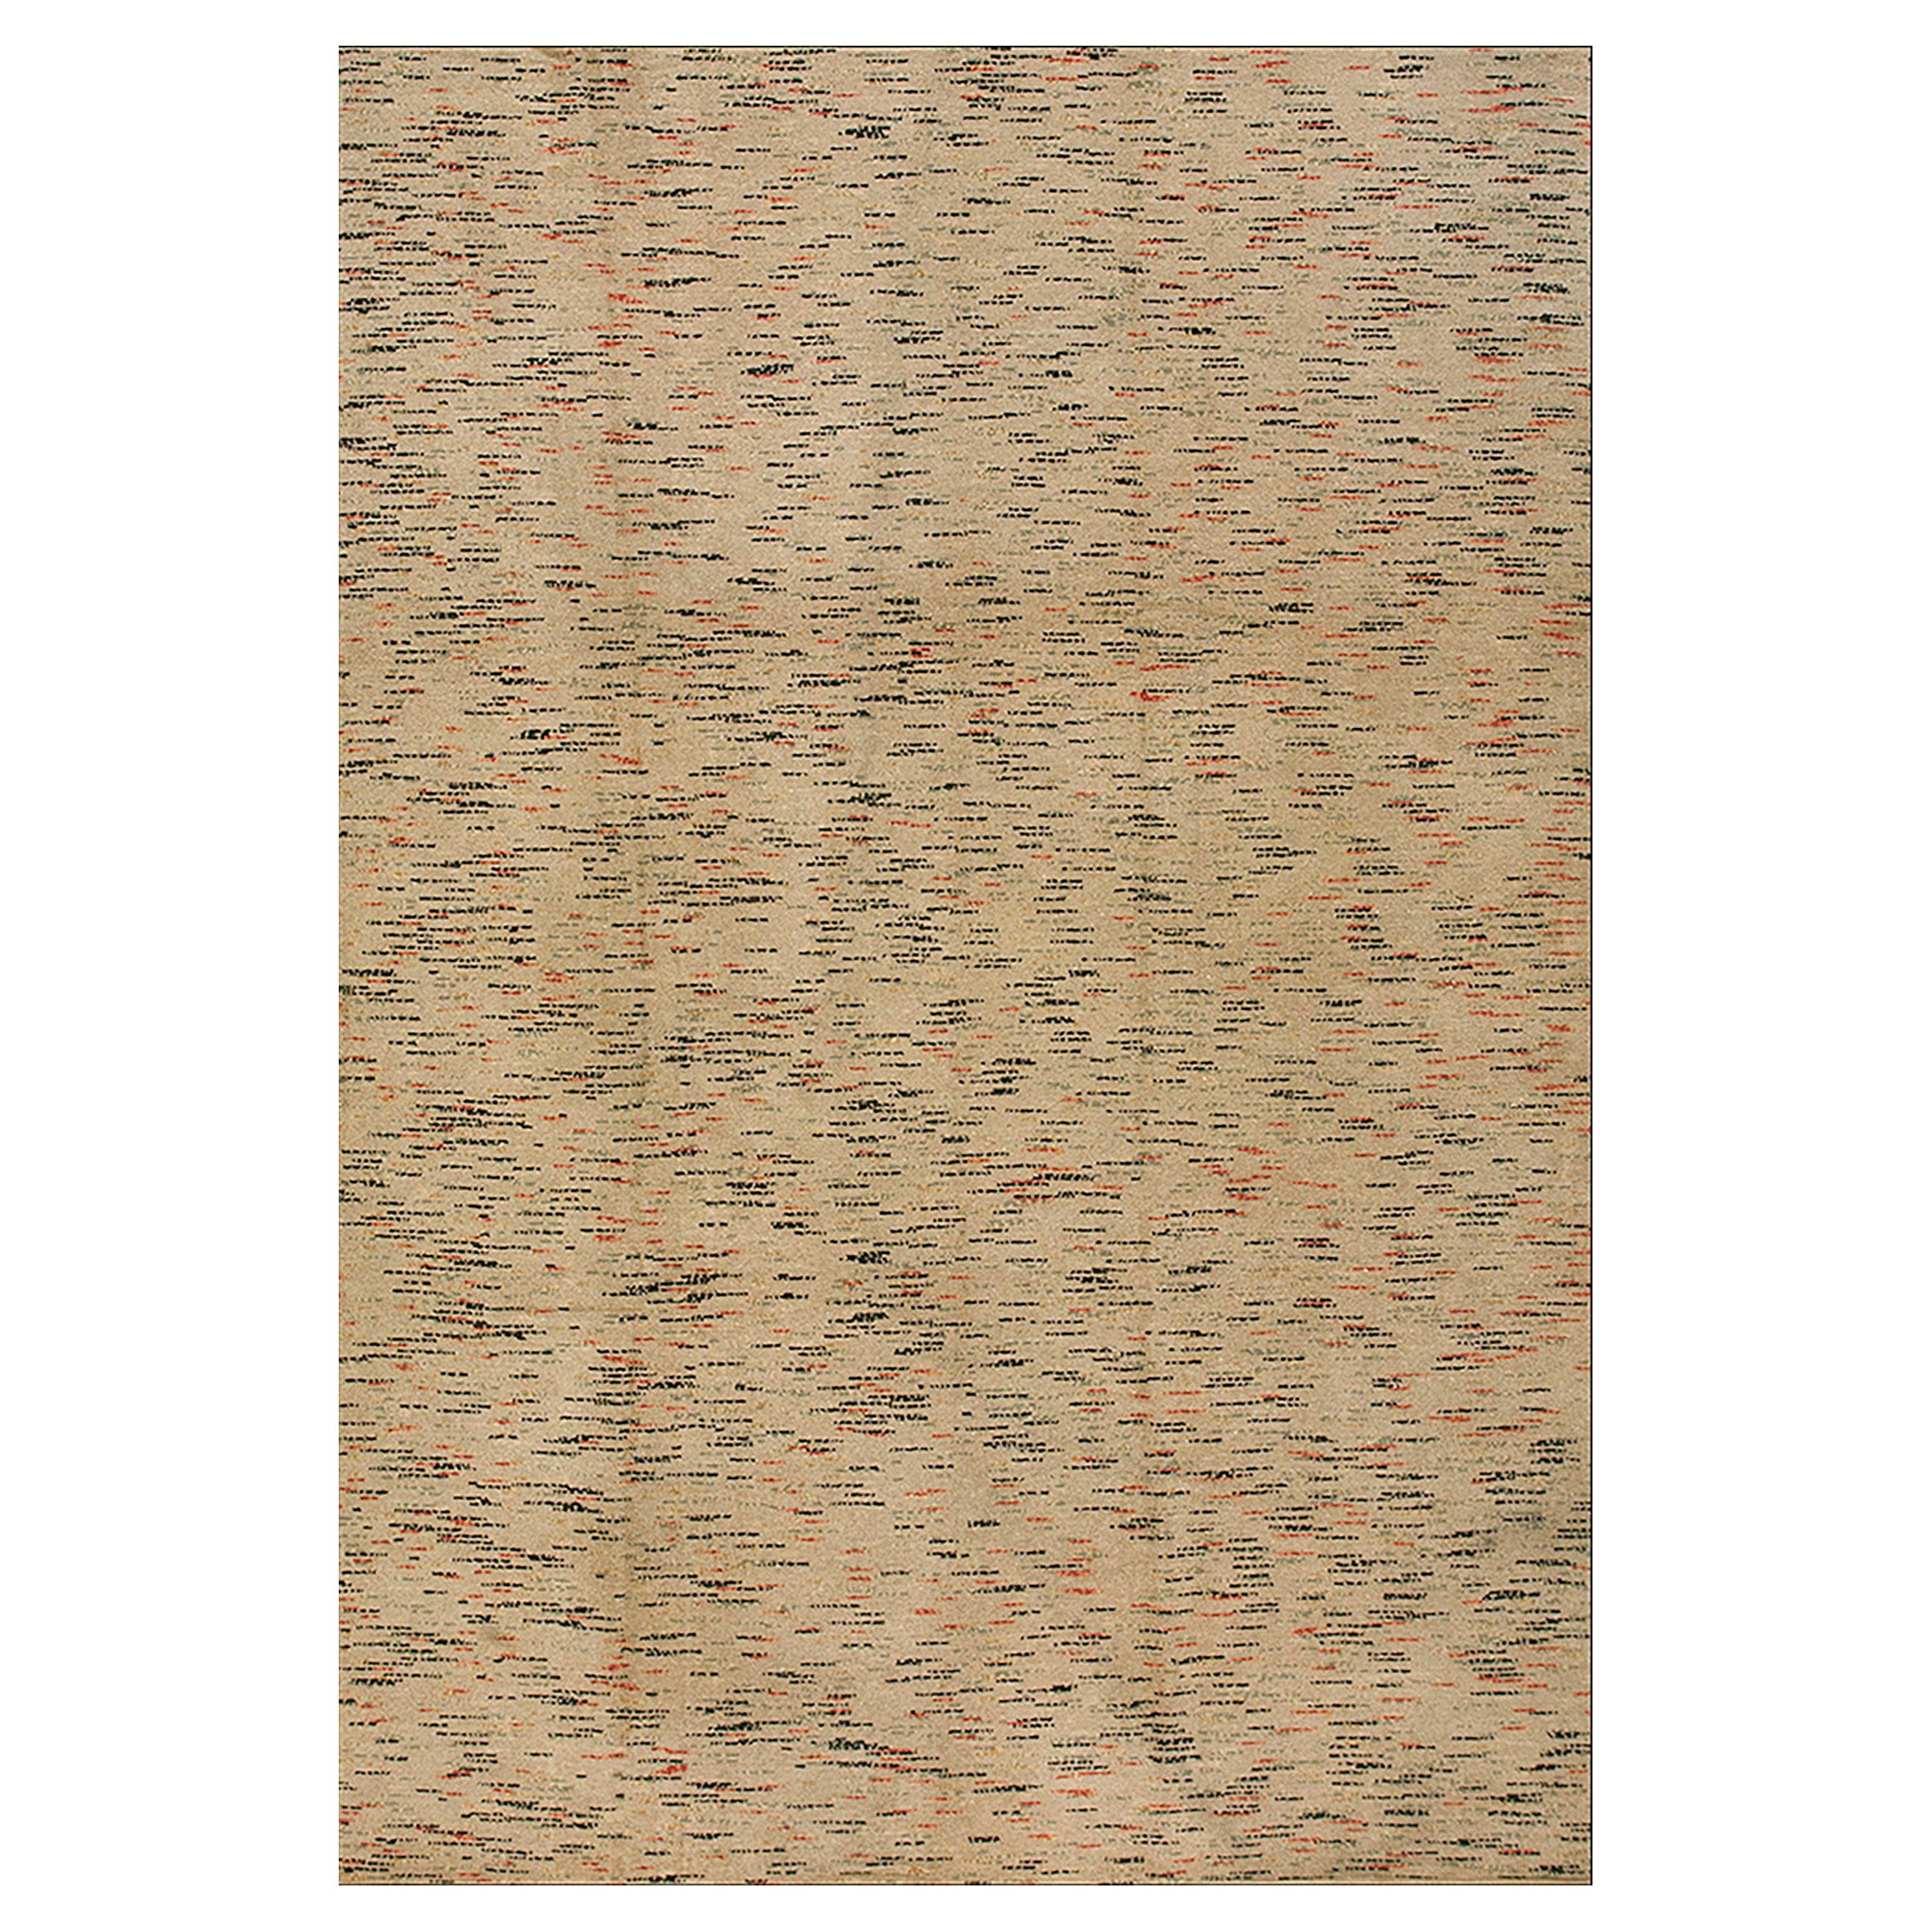 Antique American Shaker Pile Rug / 8' 6'' x 12' - 260 x 365 cm For Sale